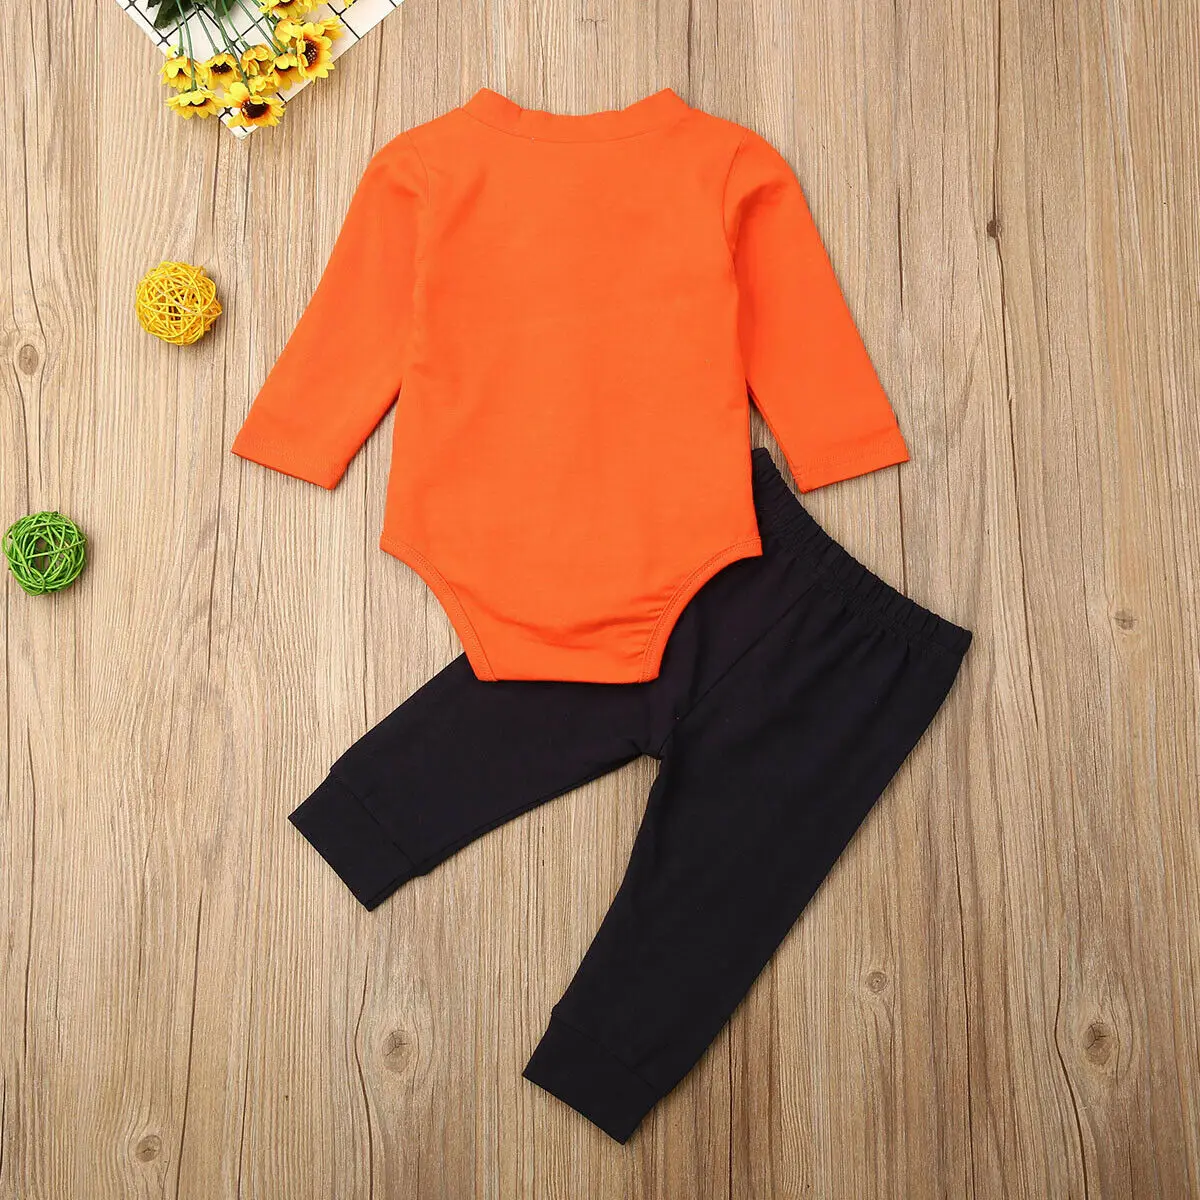 Pants Clothes 3Pcs Sets Baby Boys Thanksgiving Outfit My First Thanksgiving Bodysuit Romper